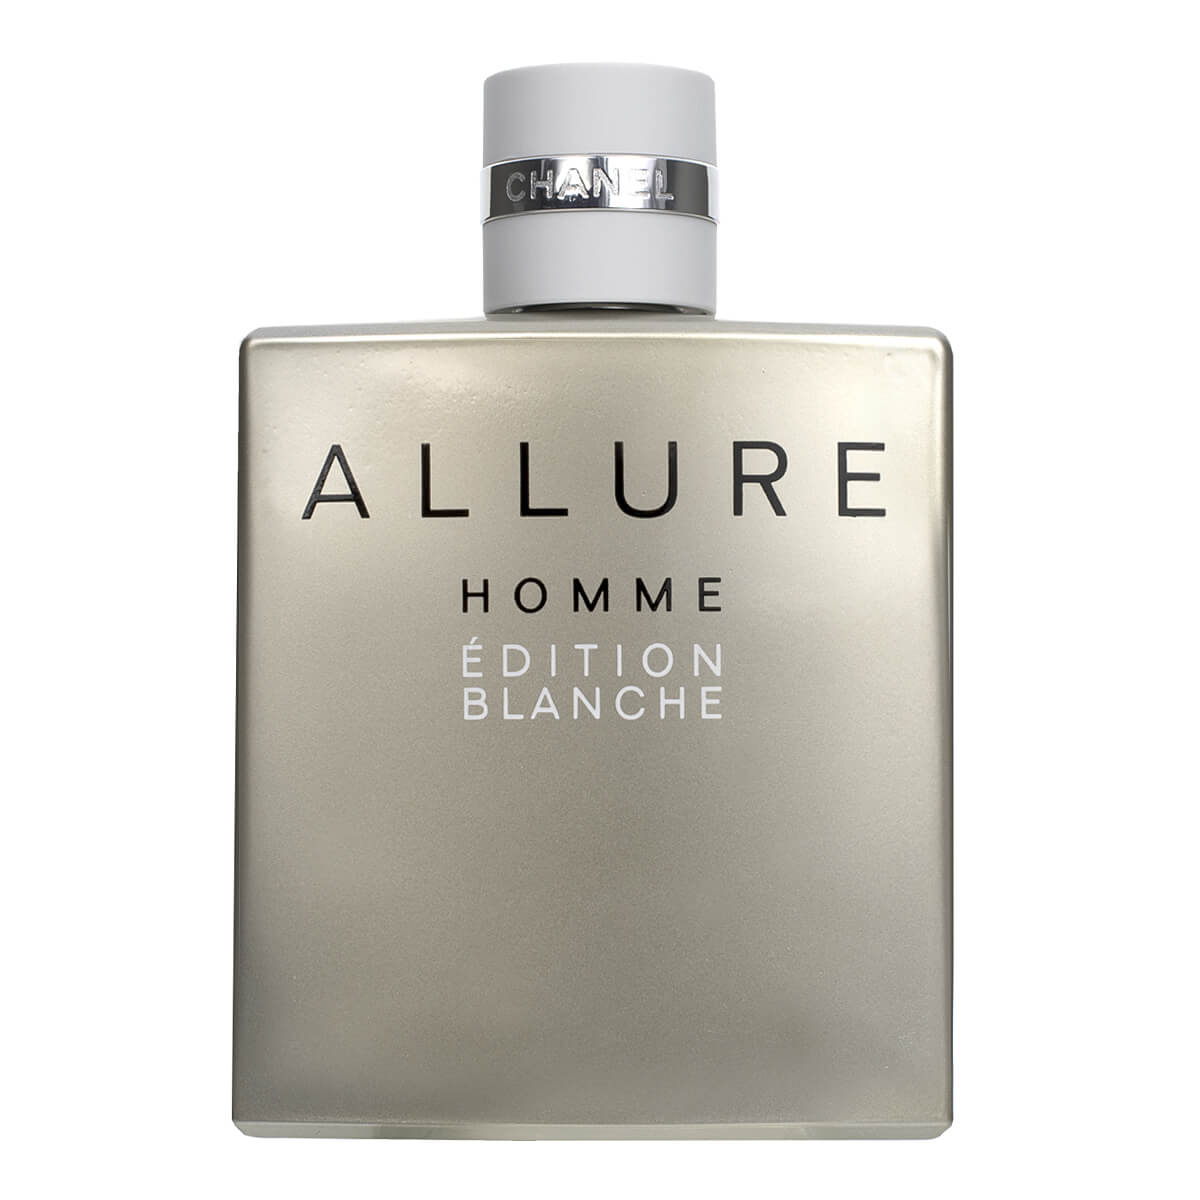 Afskedige Hollywood Credential Allure Homme Edition Blanche 100ml Eau de Parfum – Boujee Perfumes